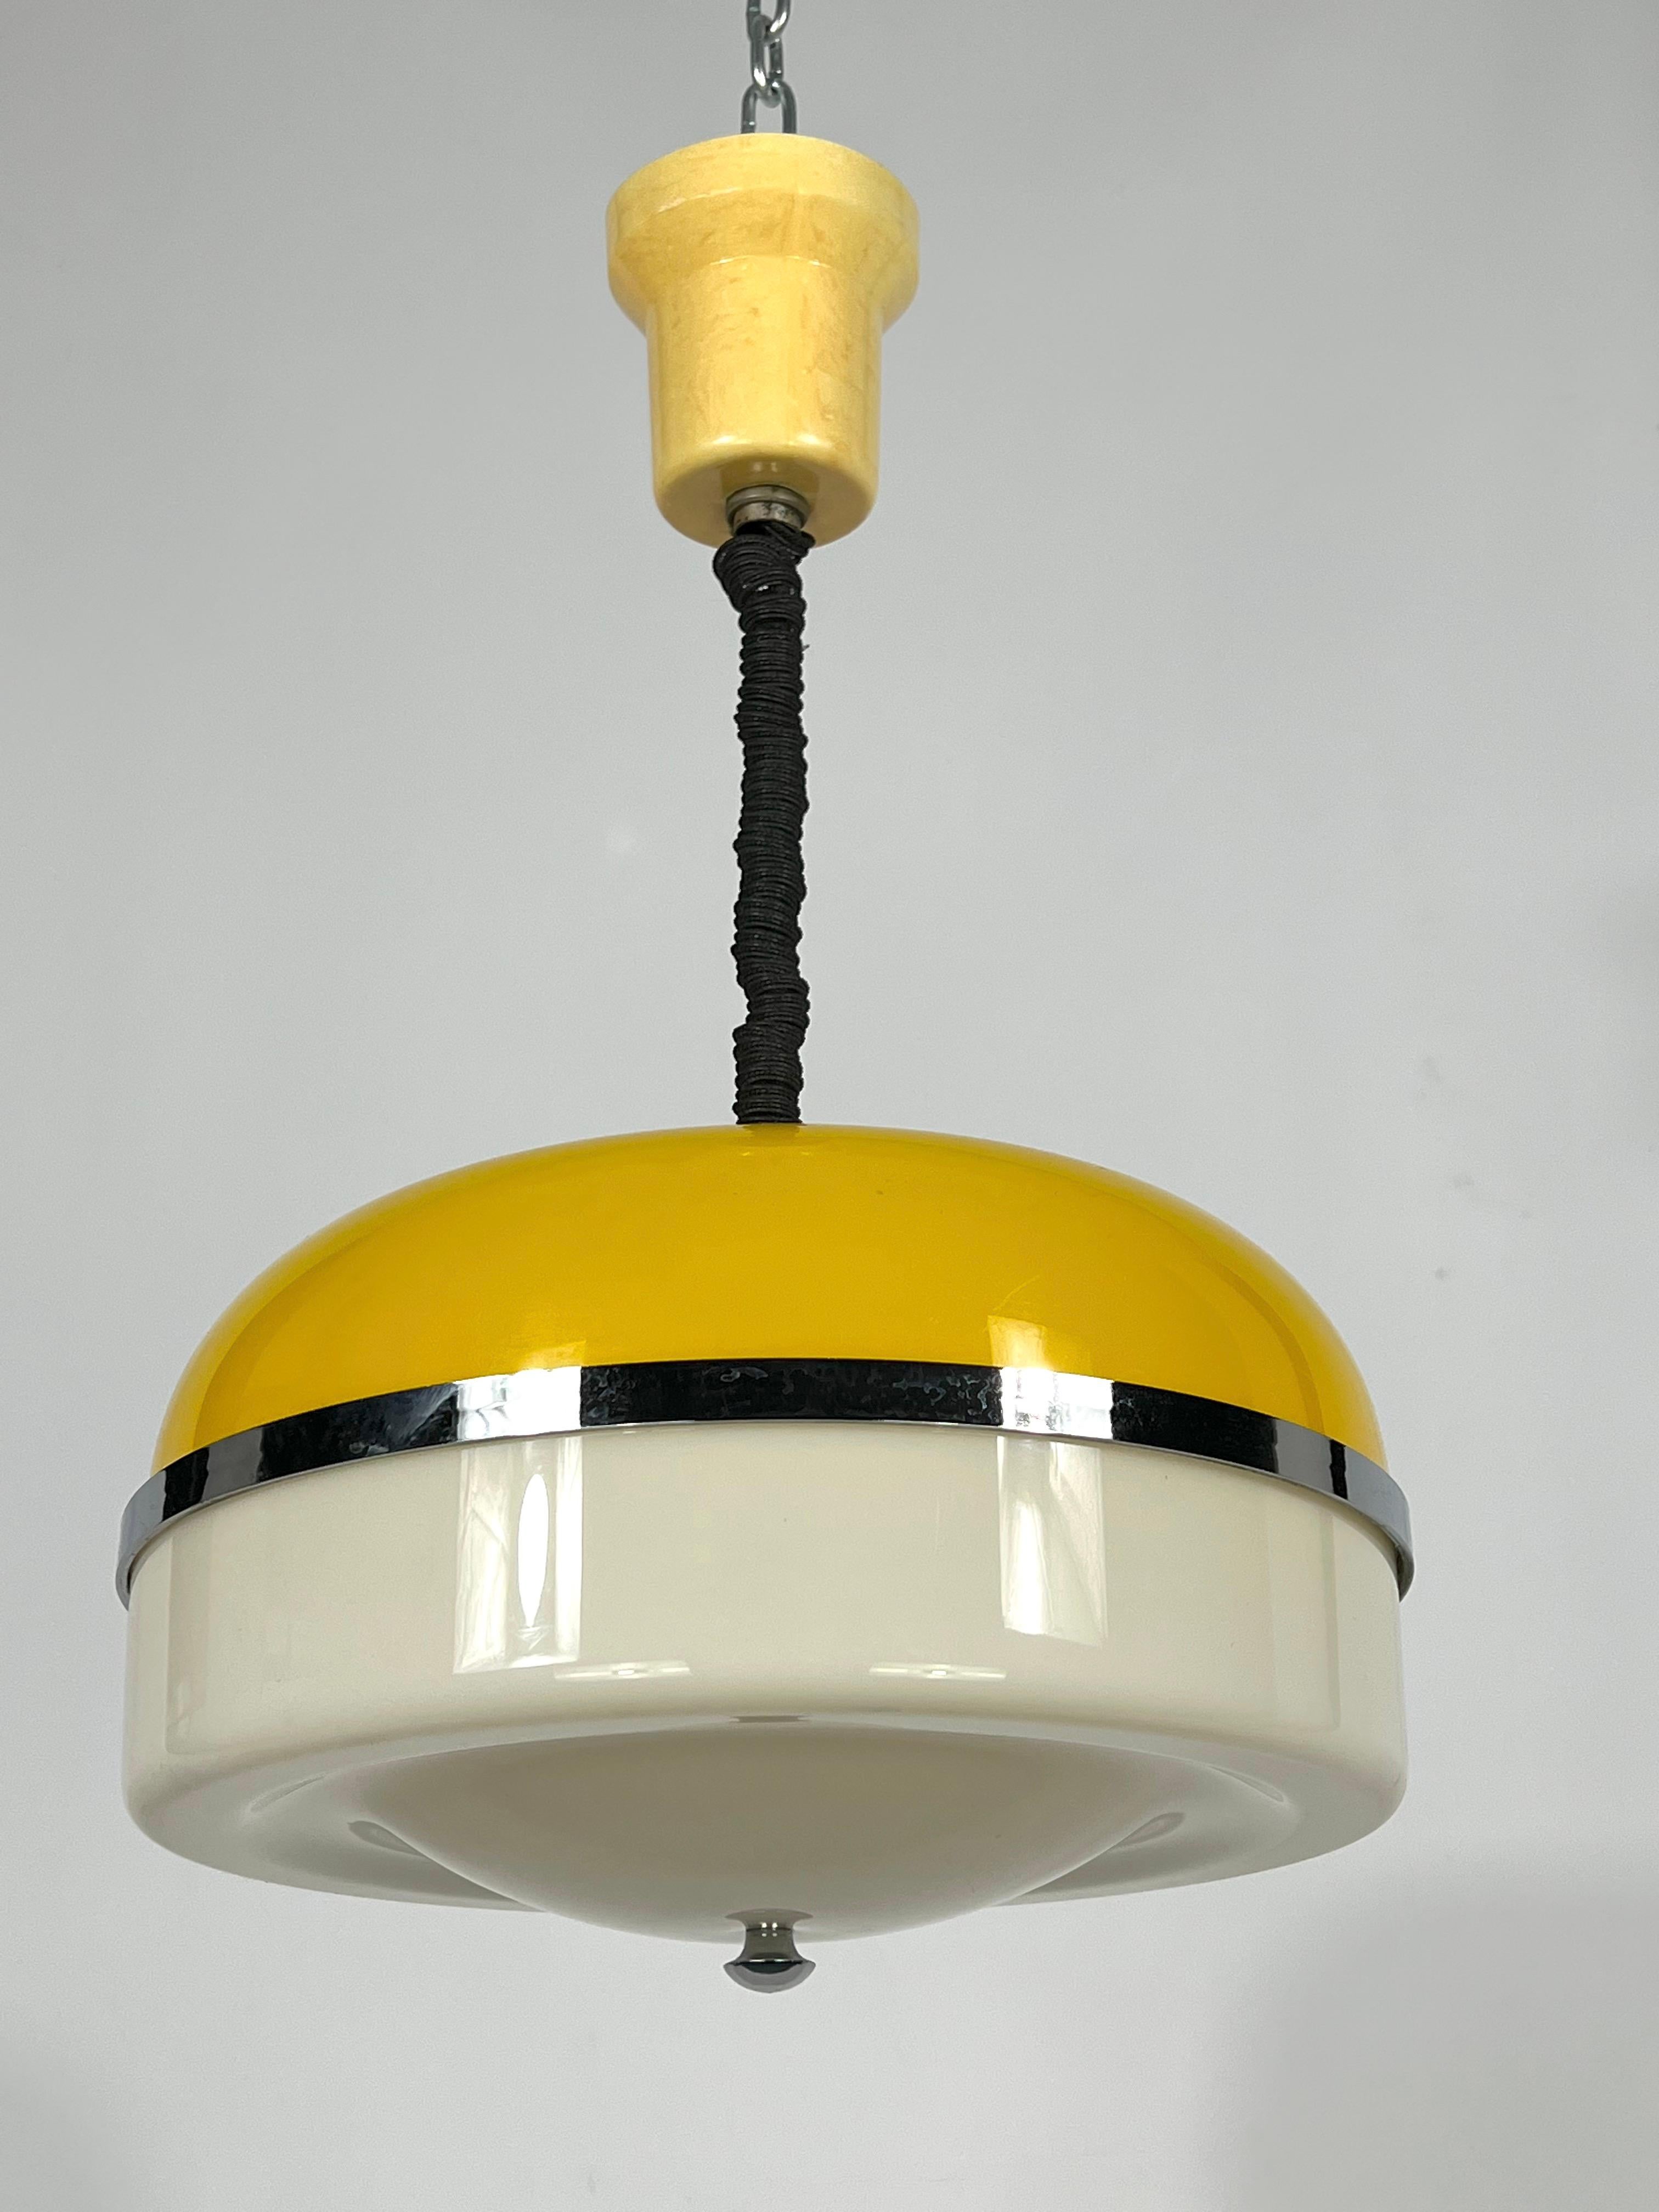 Excellent original condition with normal trace of age and use for this pendant produced in Italy during the 60s. Made of yellow and white perspex. Full working with EU standard, adaptable on demand for USA standard.